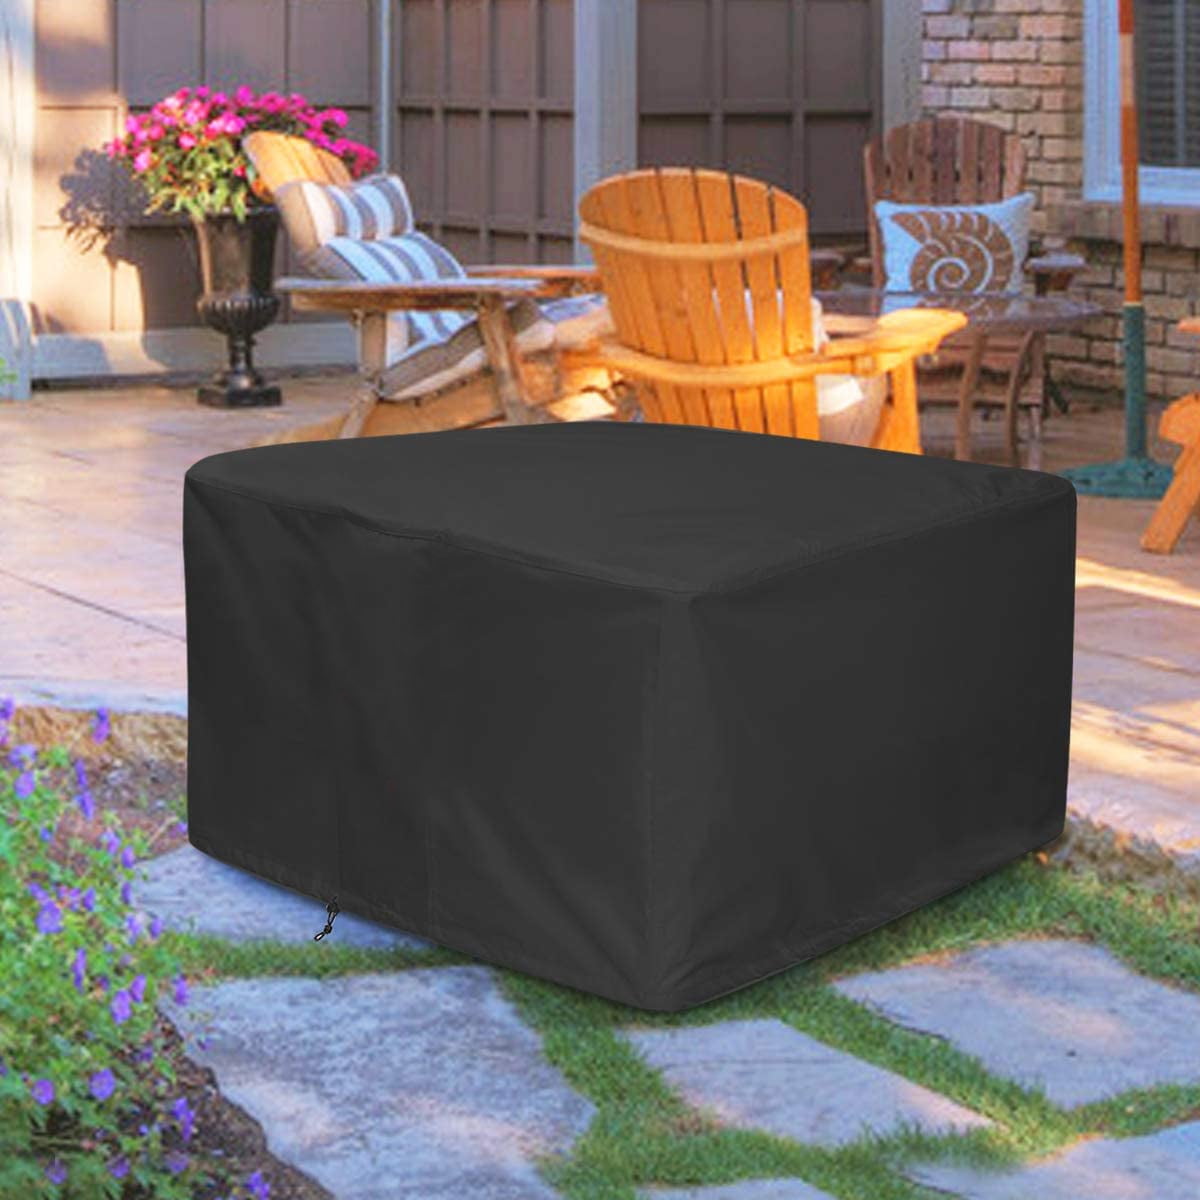 32 Inch Square Patio Table Cover, Outdoor Table And Chair Waterproof Cover